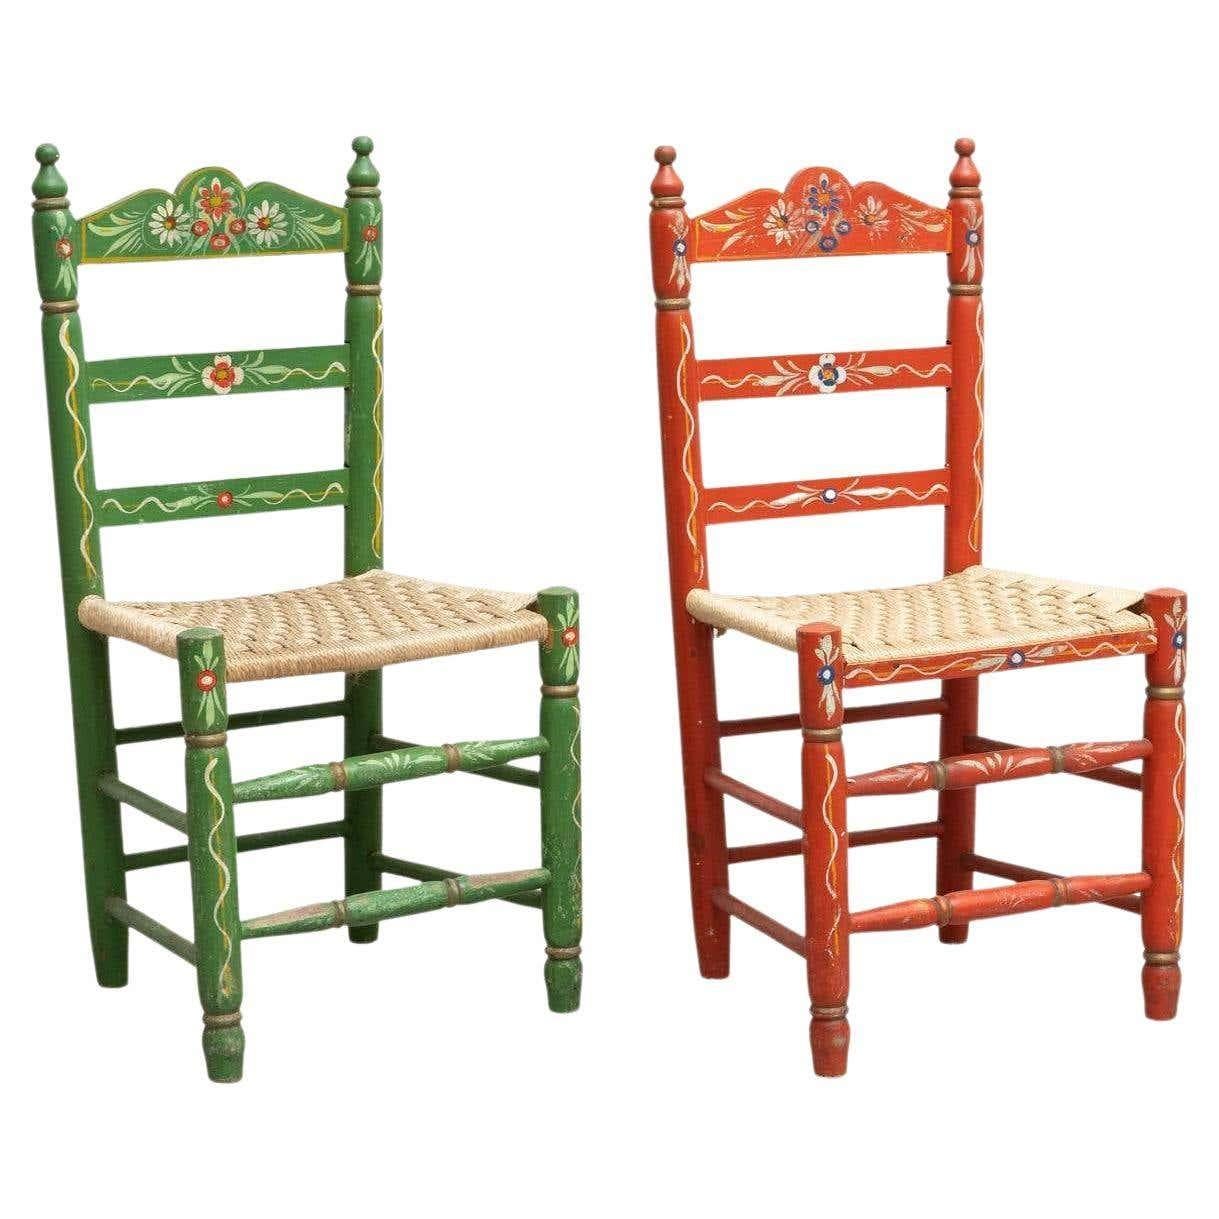 Set of two rustic handmade and handpainted wood chair.

By unknown artisan in Spain, circa 1940.

In good original condition, with minor wear consistent with age and use, preserving a beautiful patina.

Materials:
Wood.

